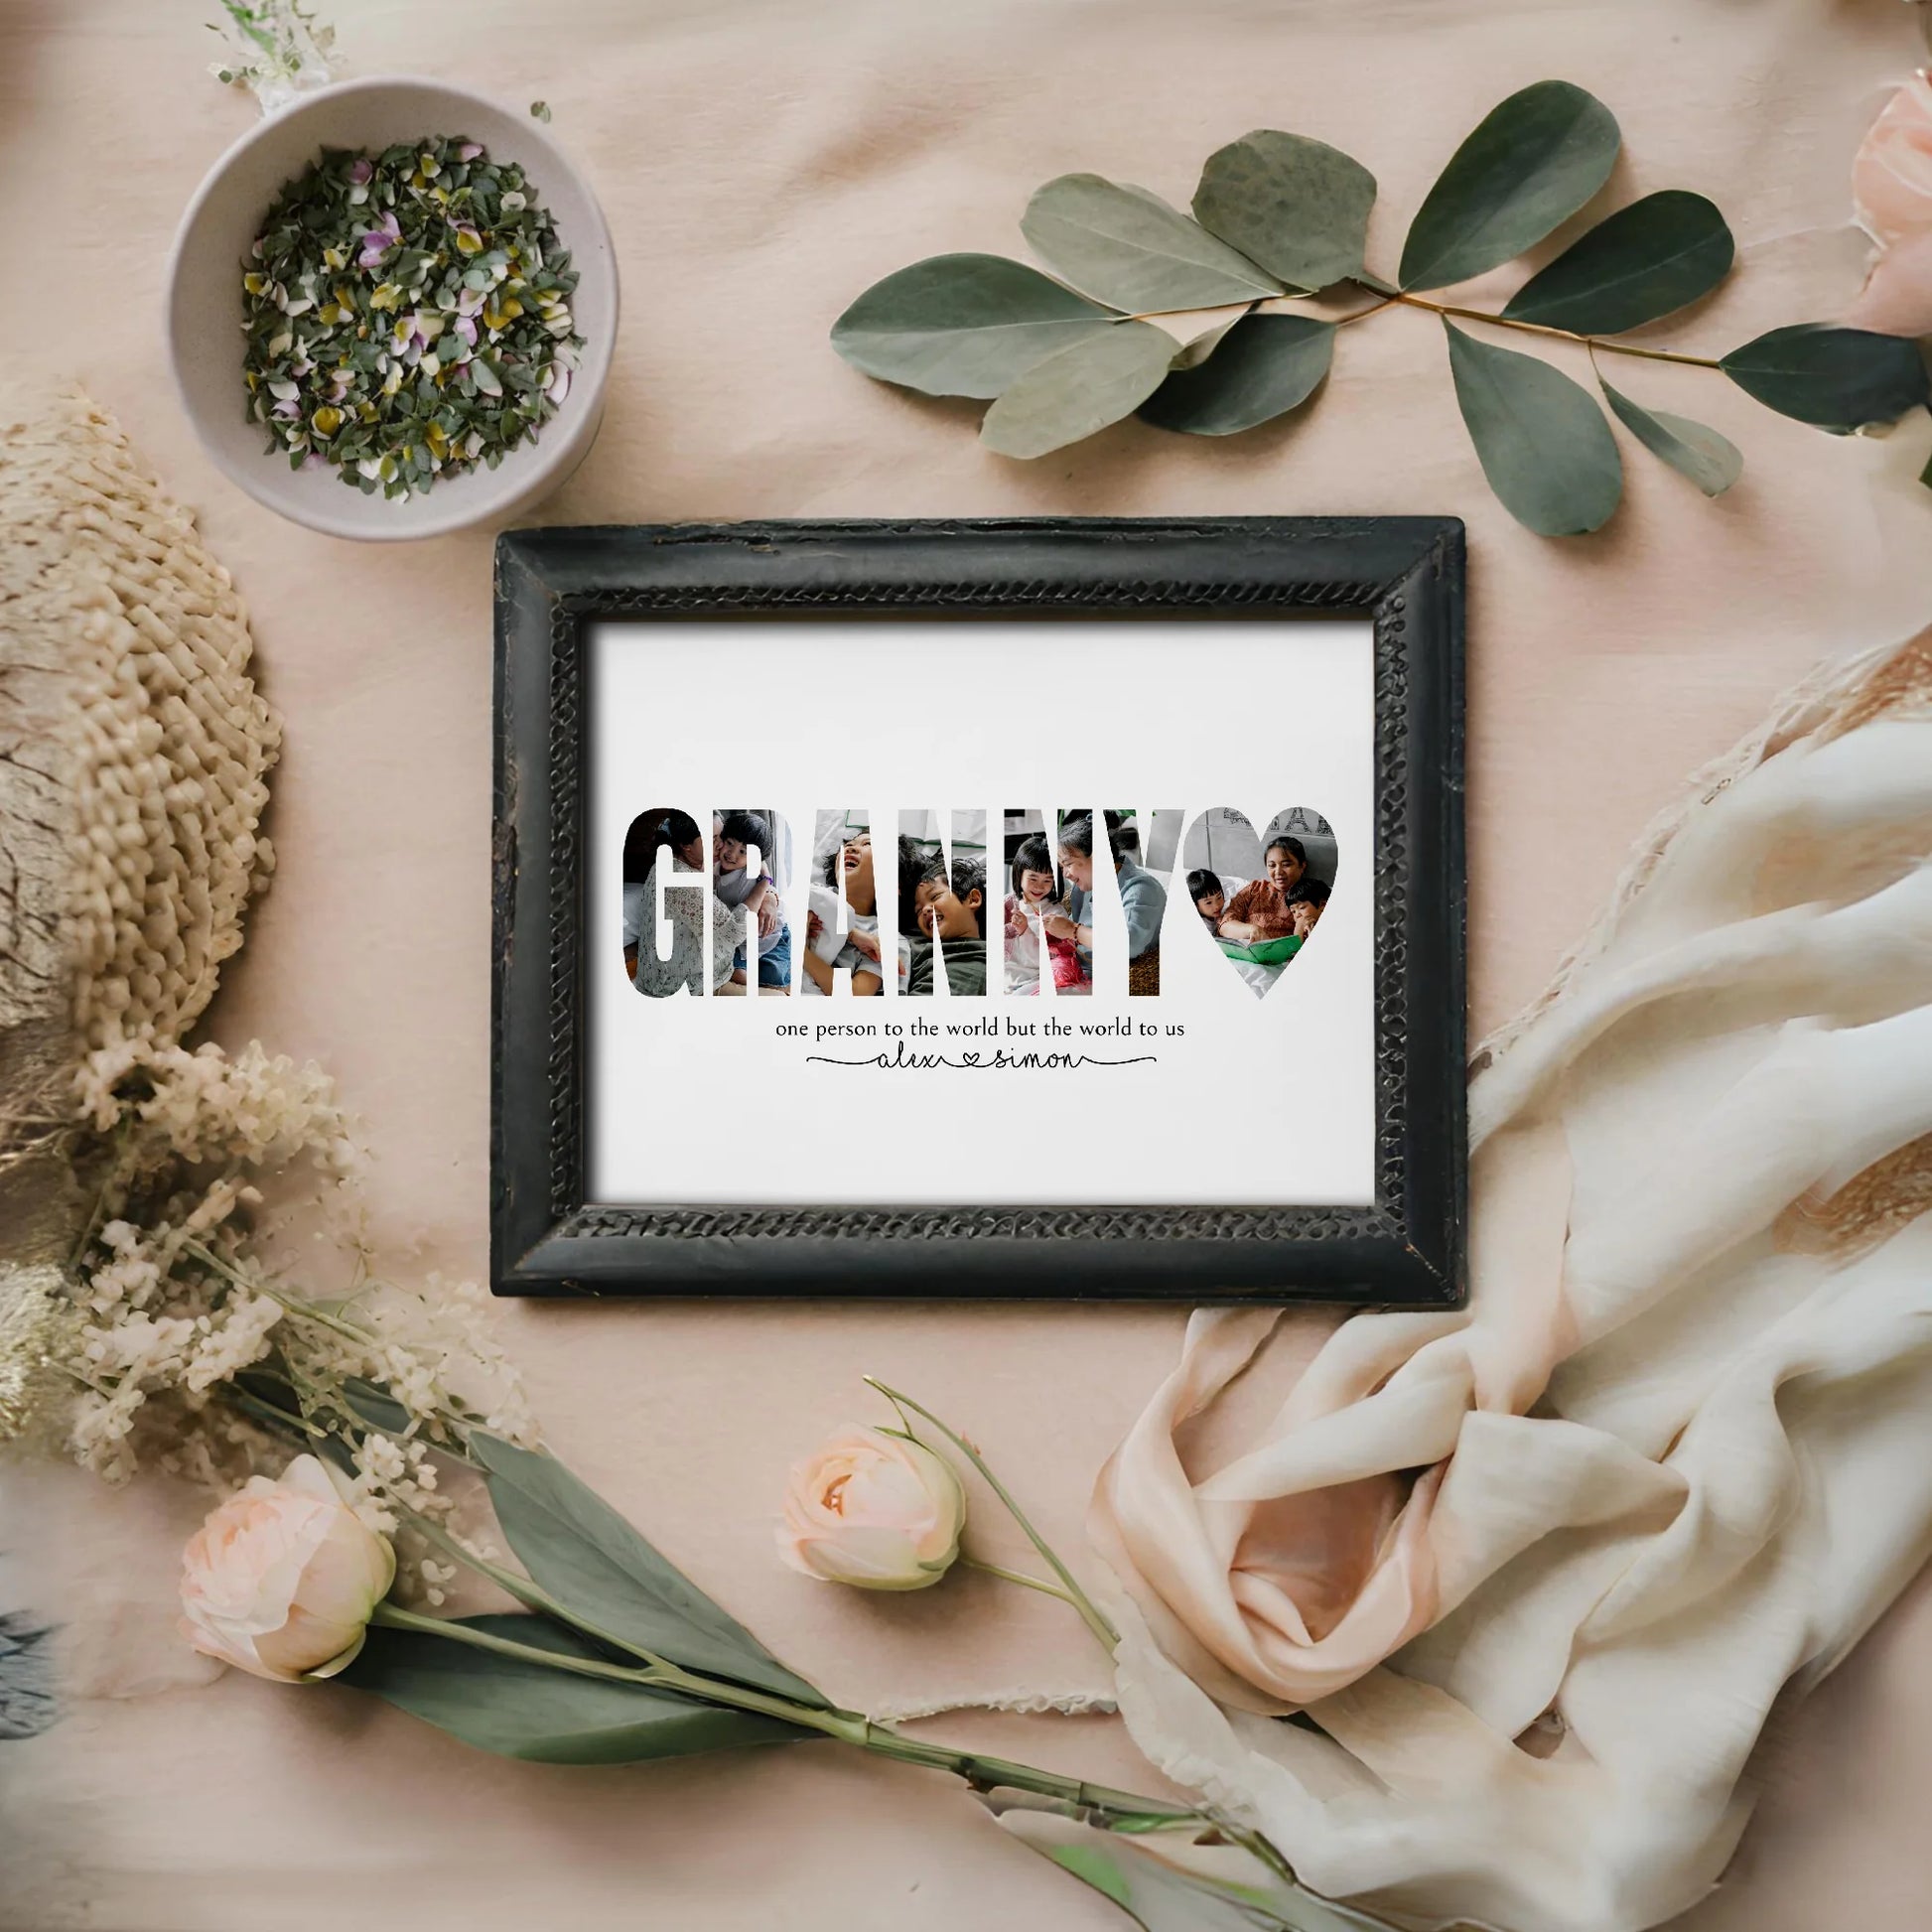 Easy DIY Granny Photo Collage Personalized Gift on a Budget